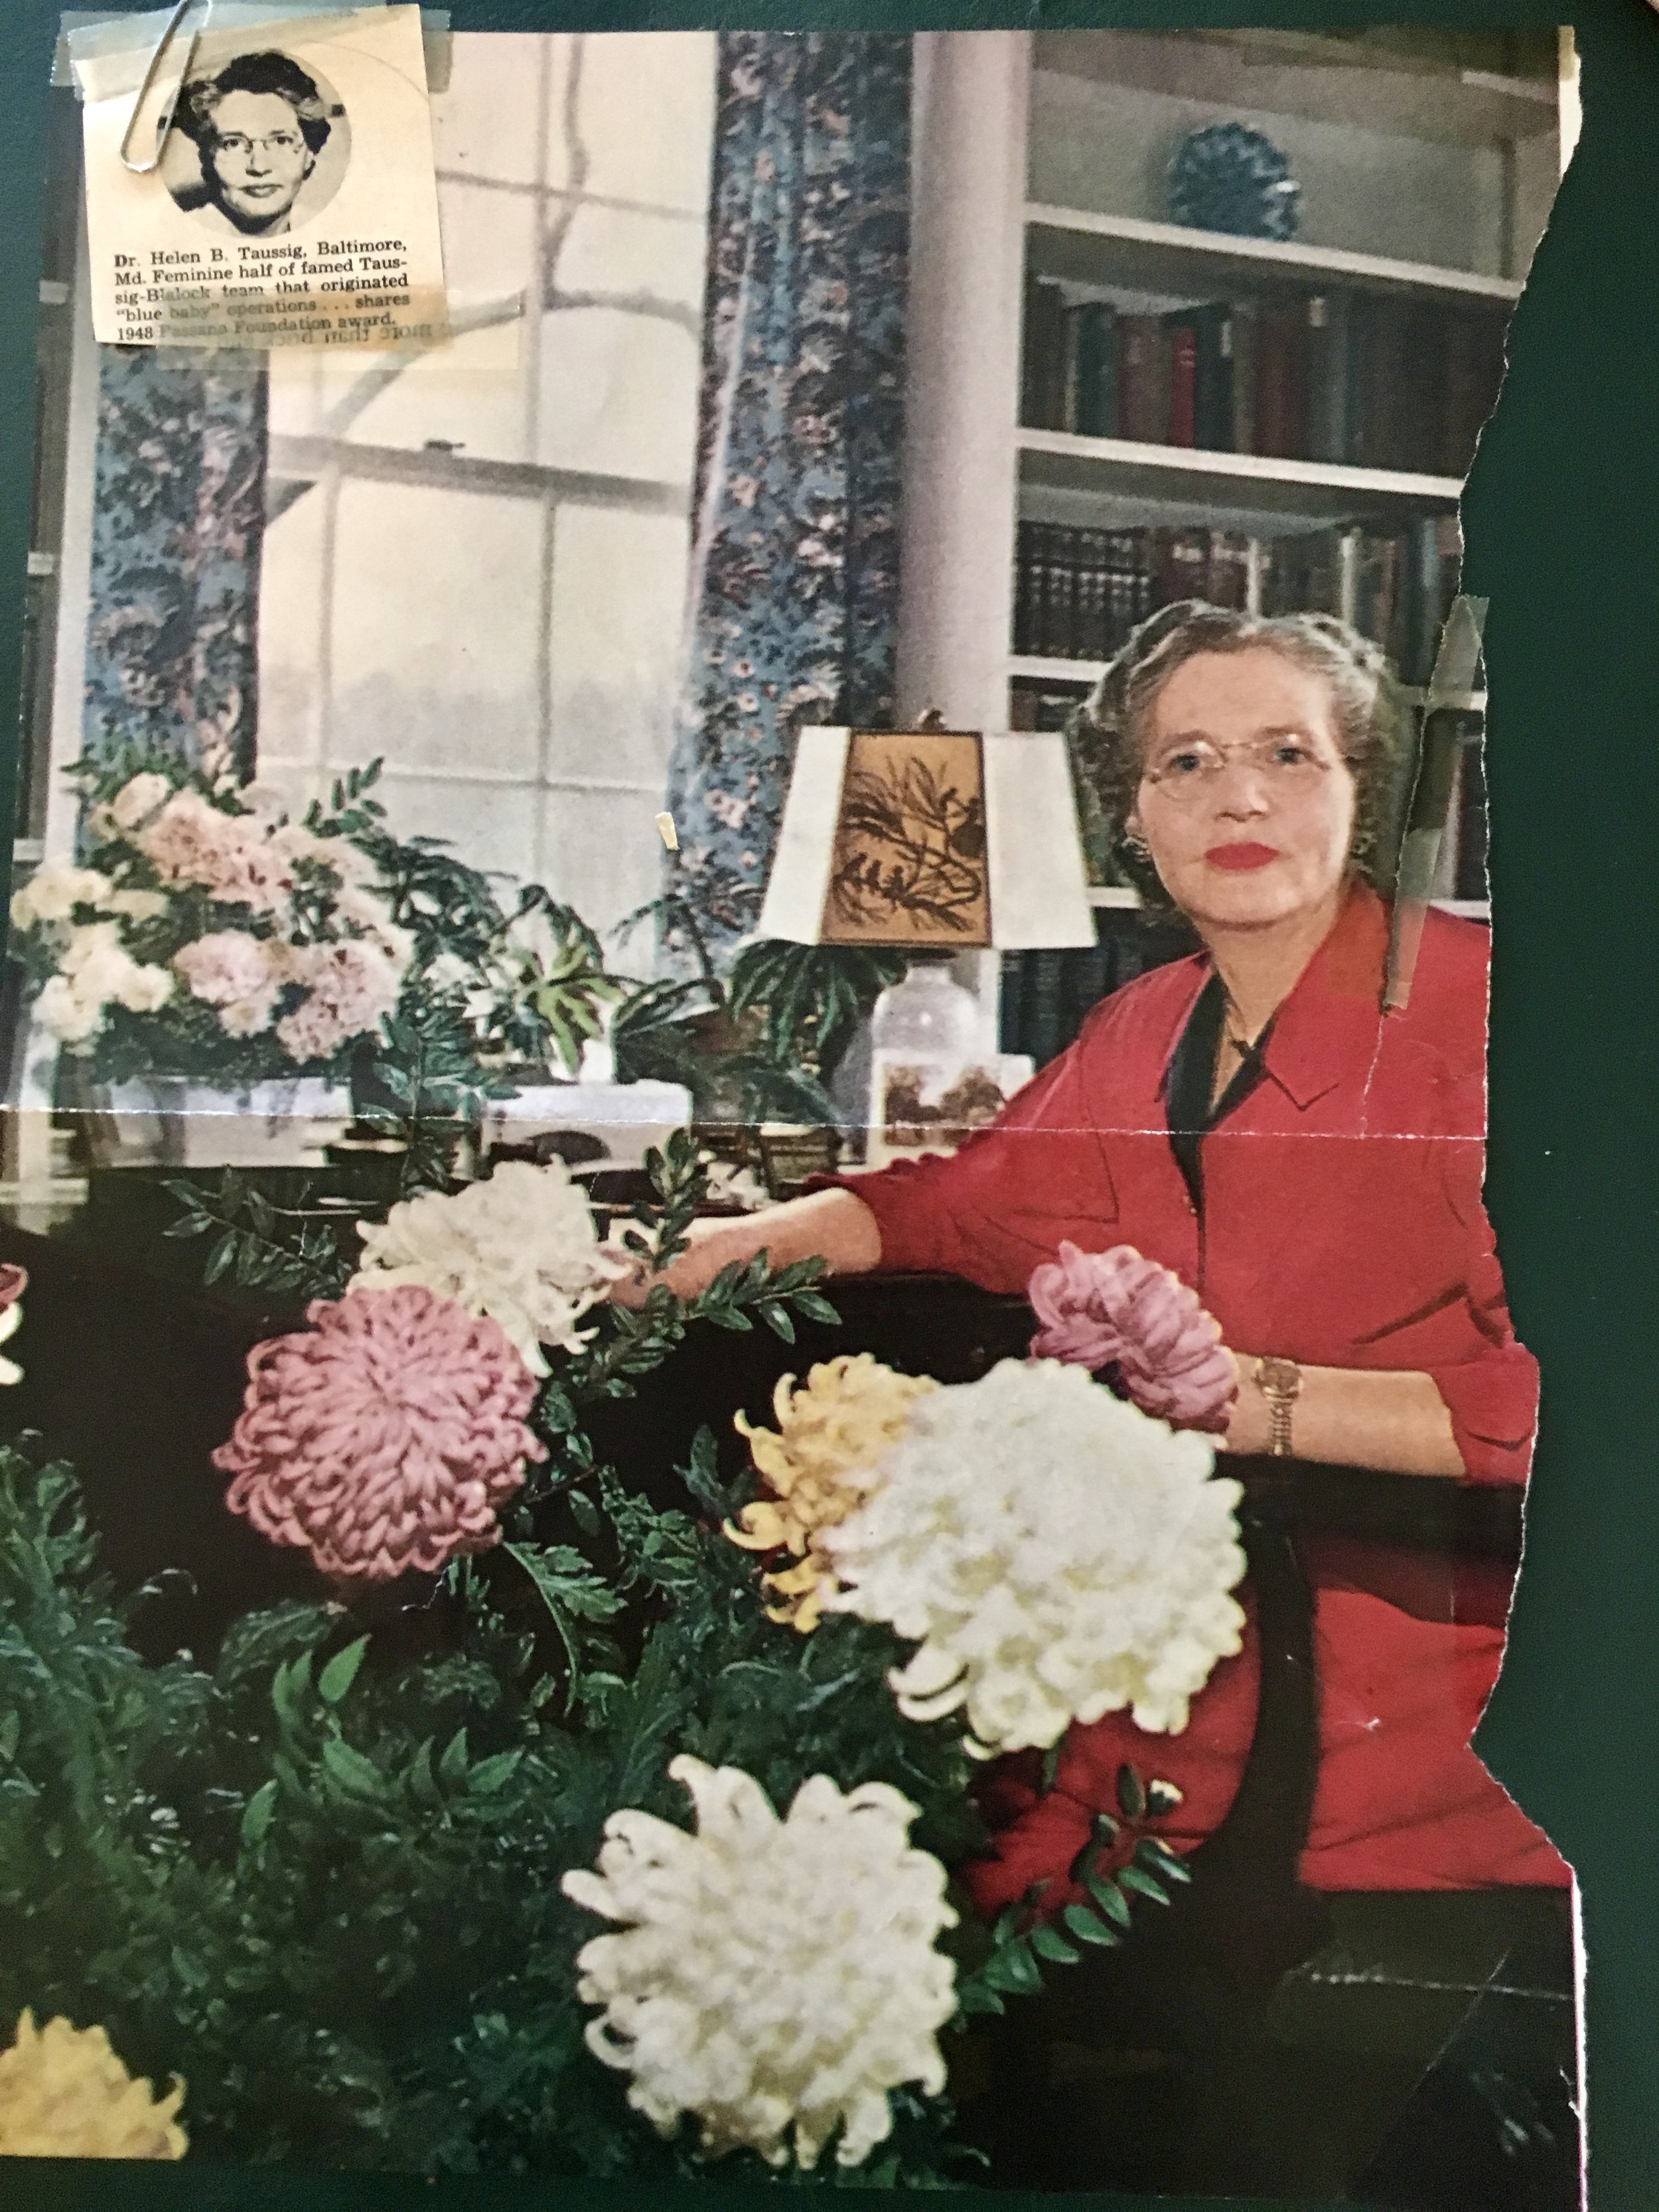  Photo of Helen from a patient’s scrapbook. Courtesy of Paul Rosenthal.    